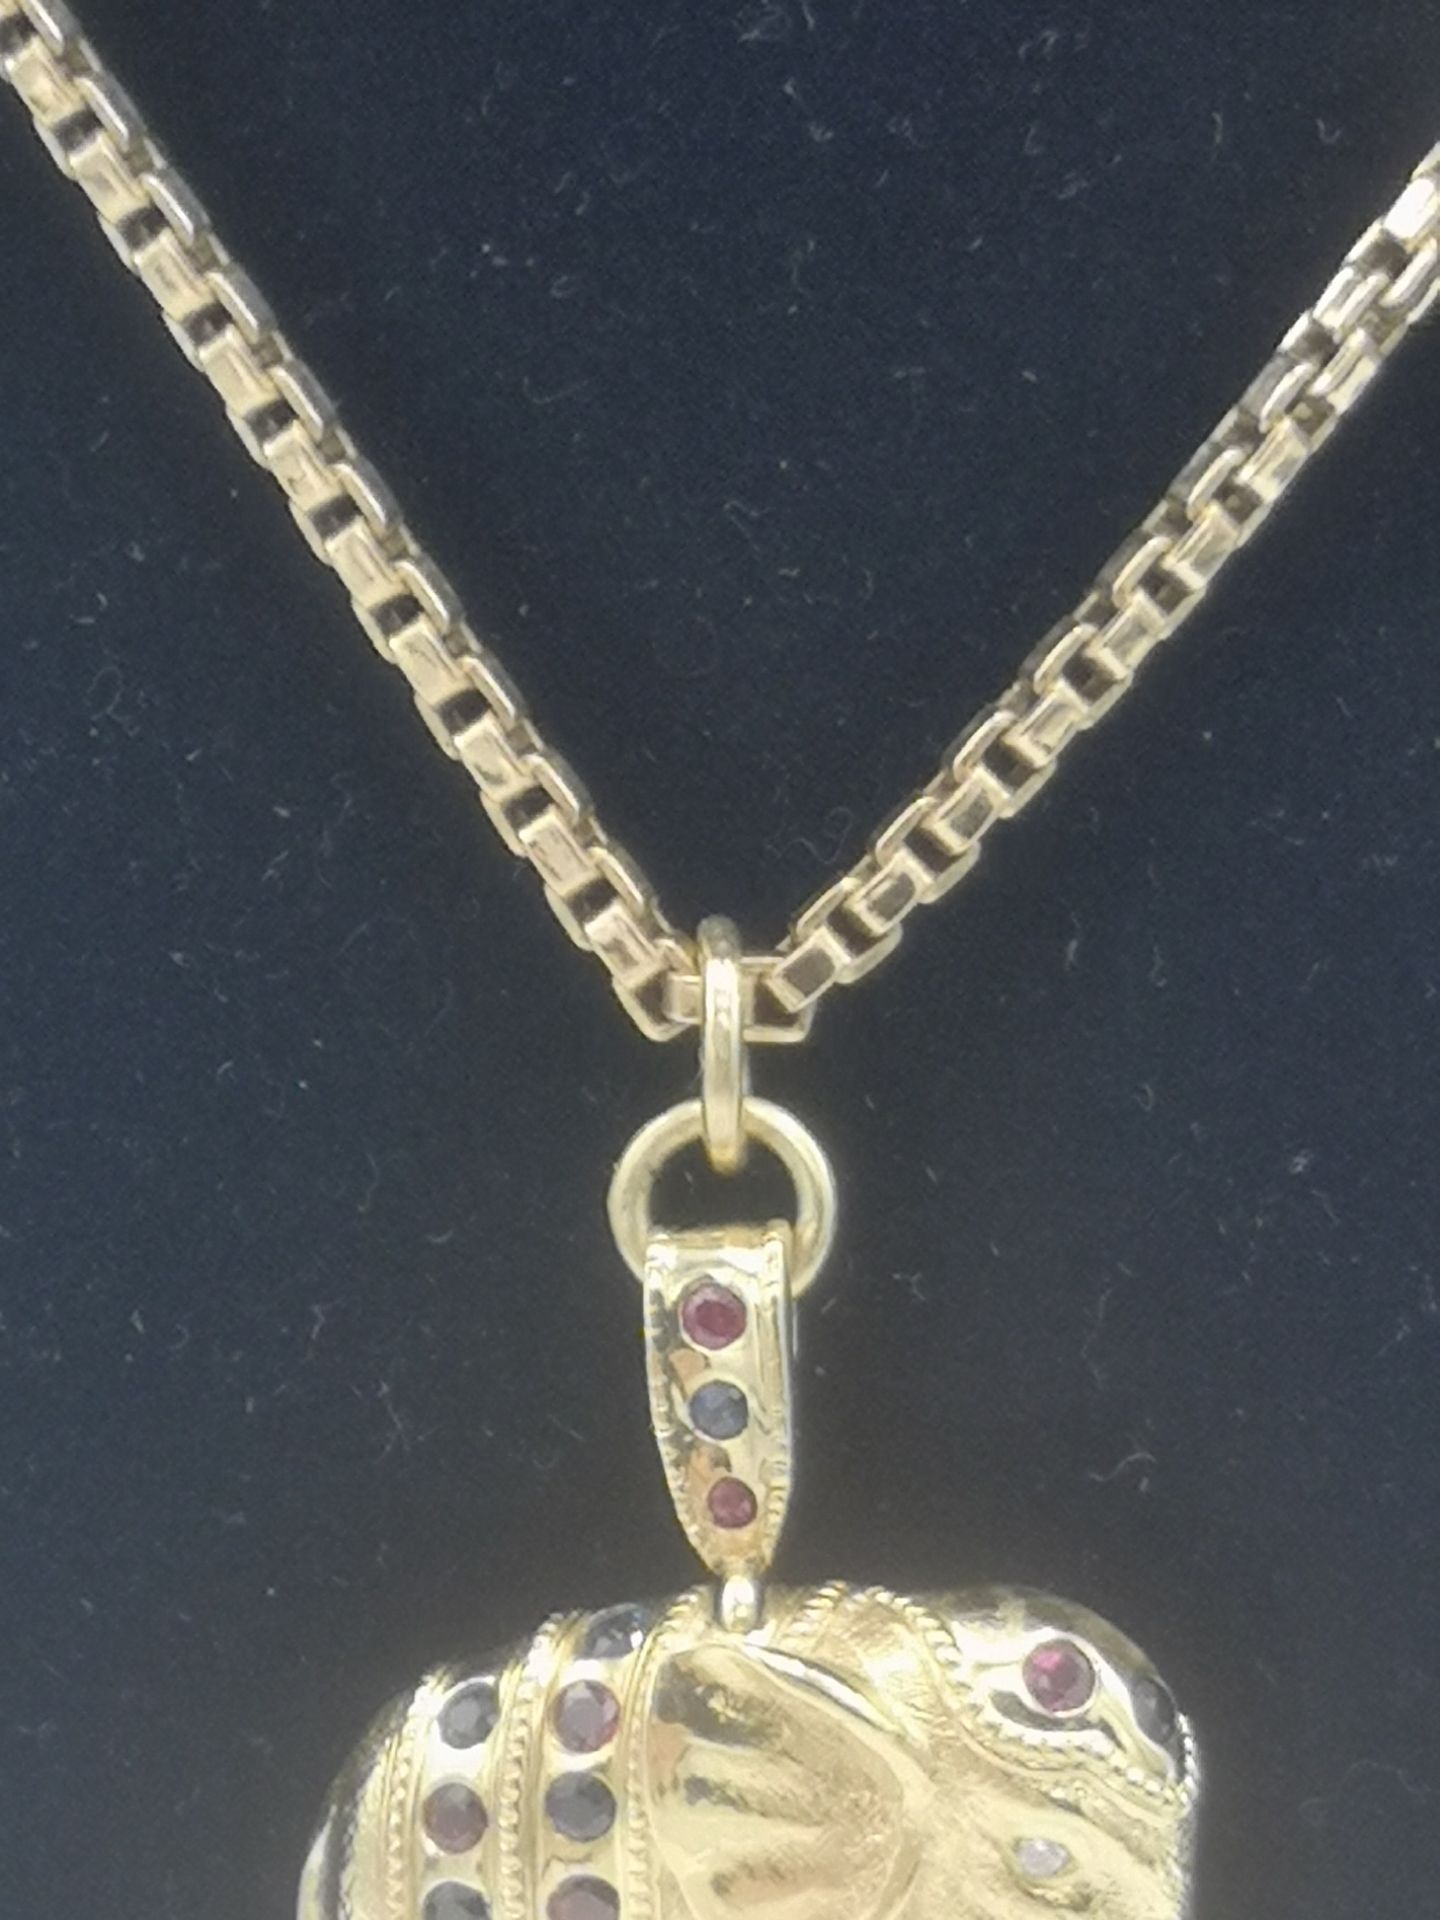 18ct gold elephant pendant set with gemstones on 18ct gold chain - Image 5 of 11